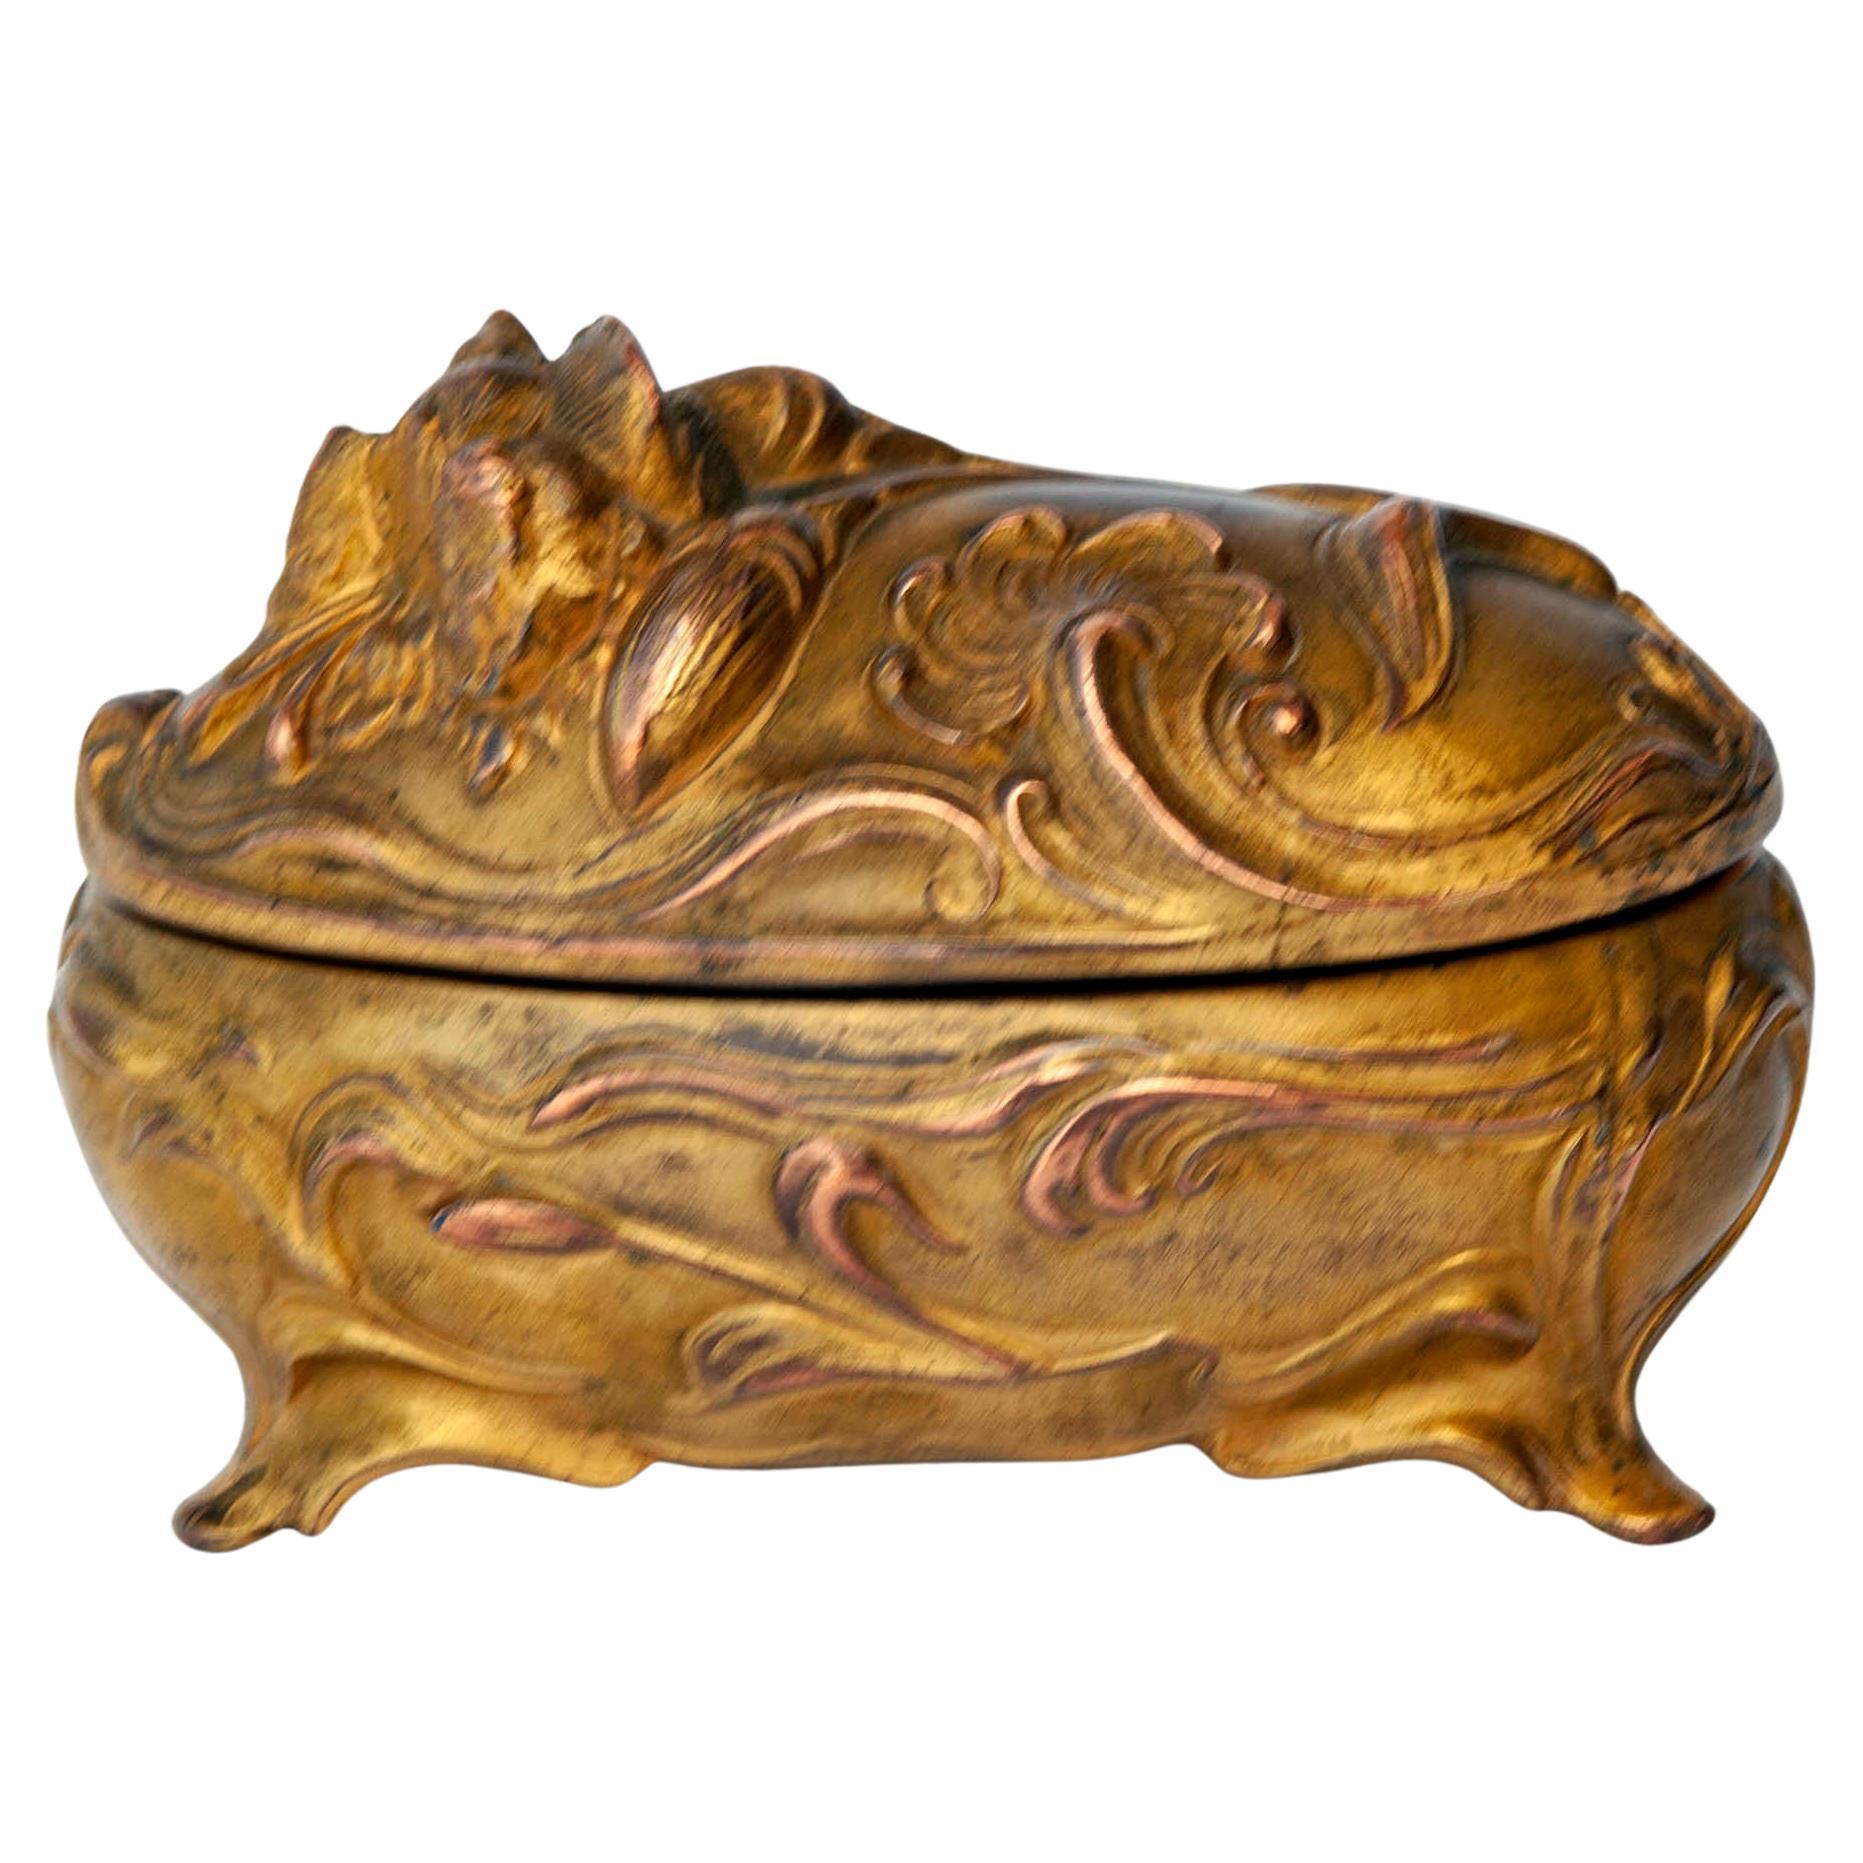 Art Nouveau gilt bronze jewelry box with foliage, the interior is unlined 
Perfect for bedside to throw jewelry/ rings before bed. 
The box is in great antique condition with age wear to the gilt.